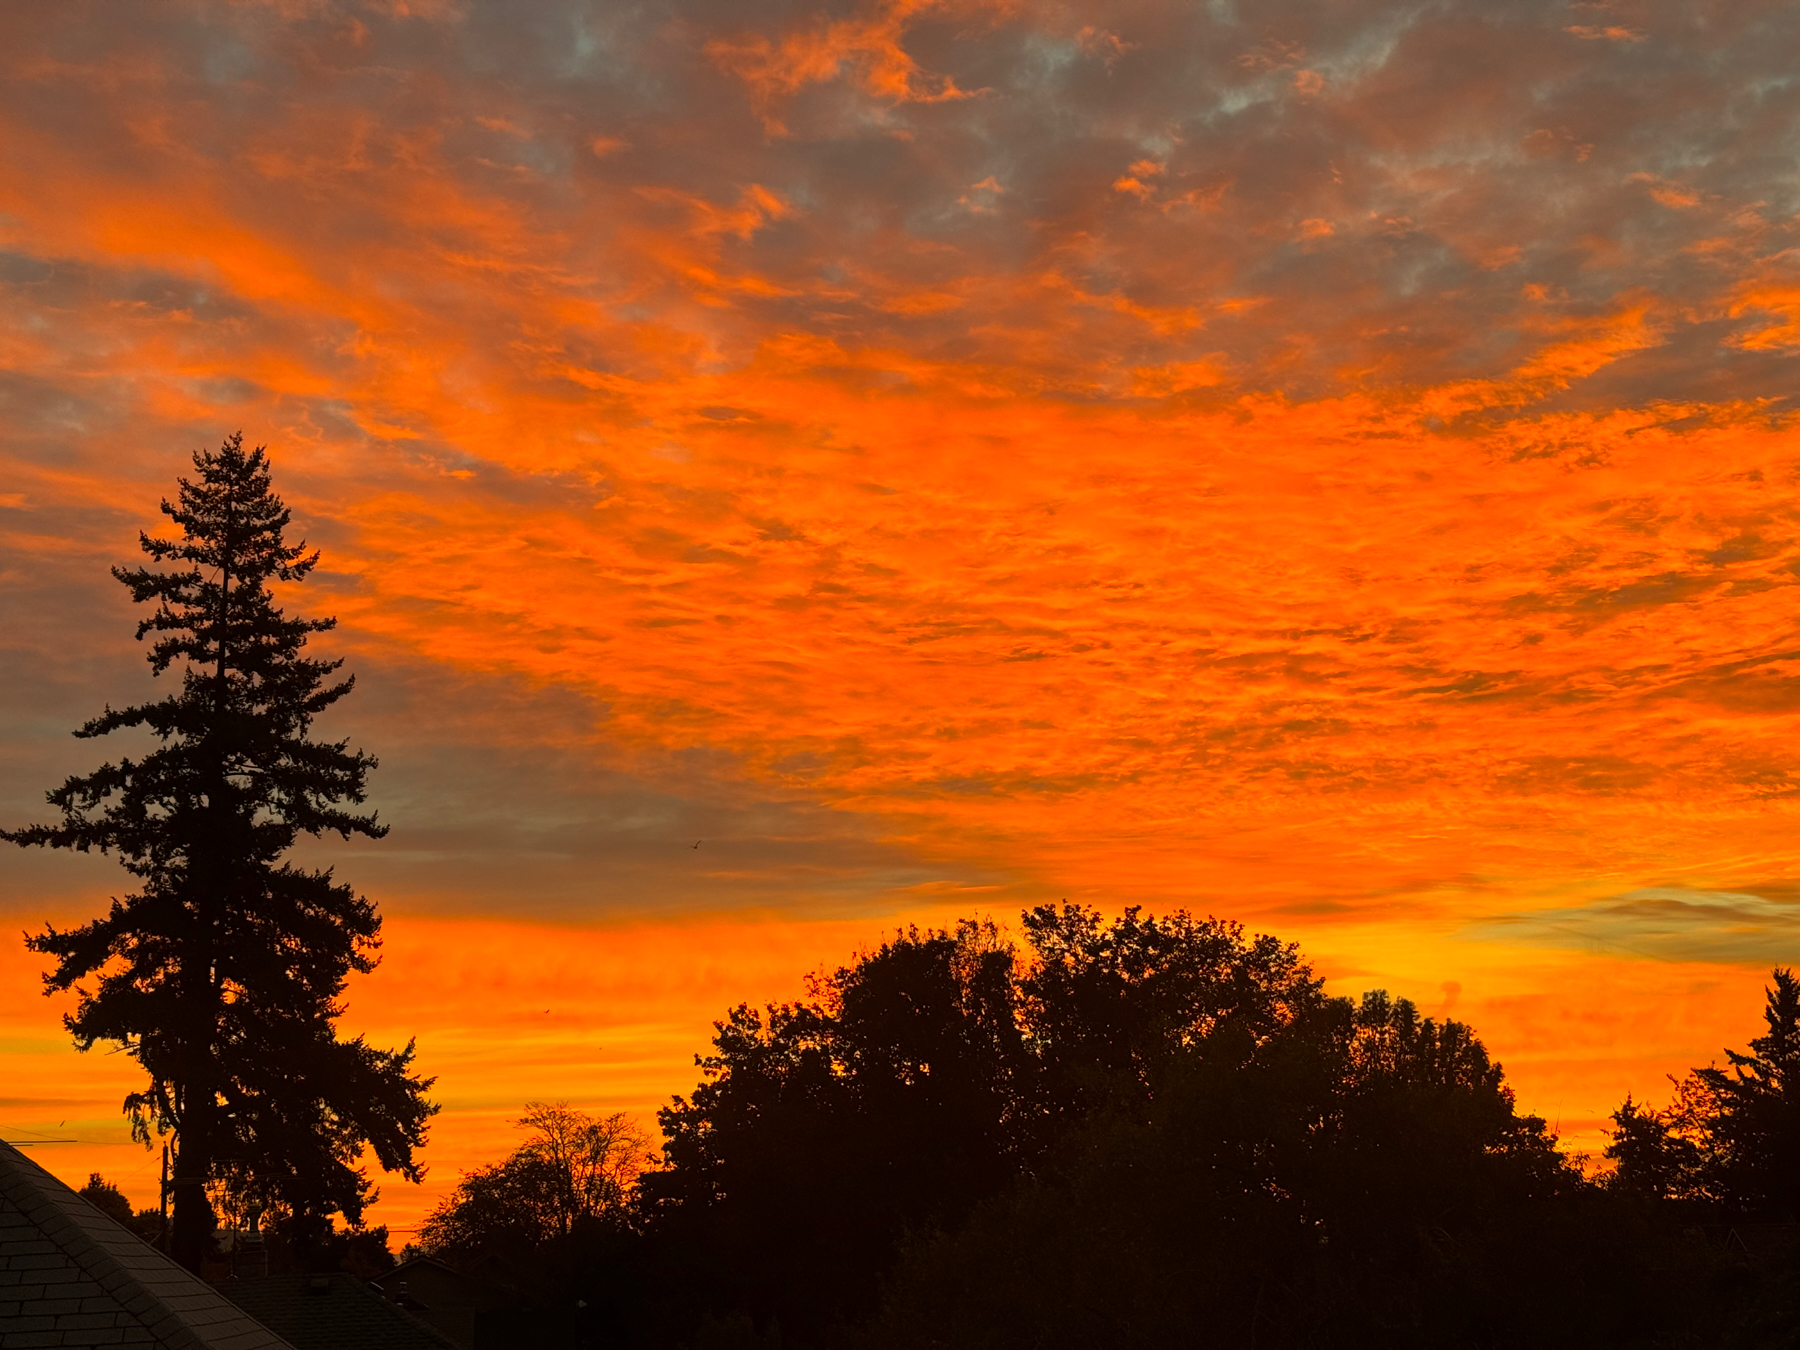 Silhouette of trees in the foreground. Very bright orange to yellow hues rising into the cloudy sky from the horizon.